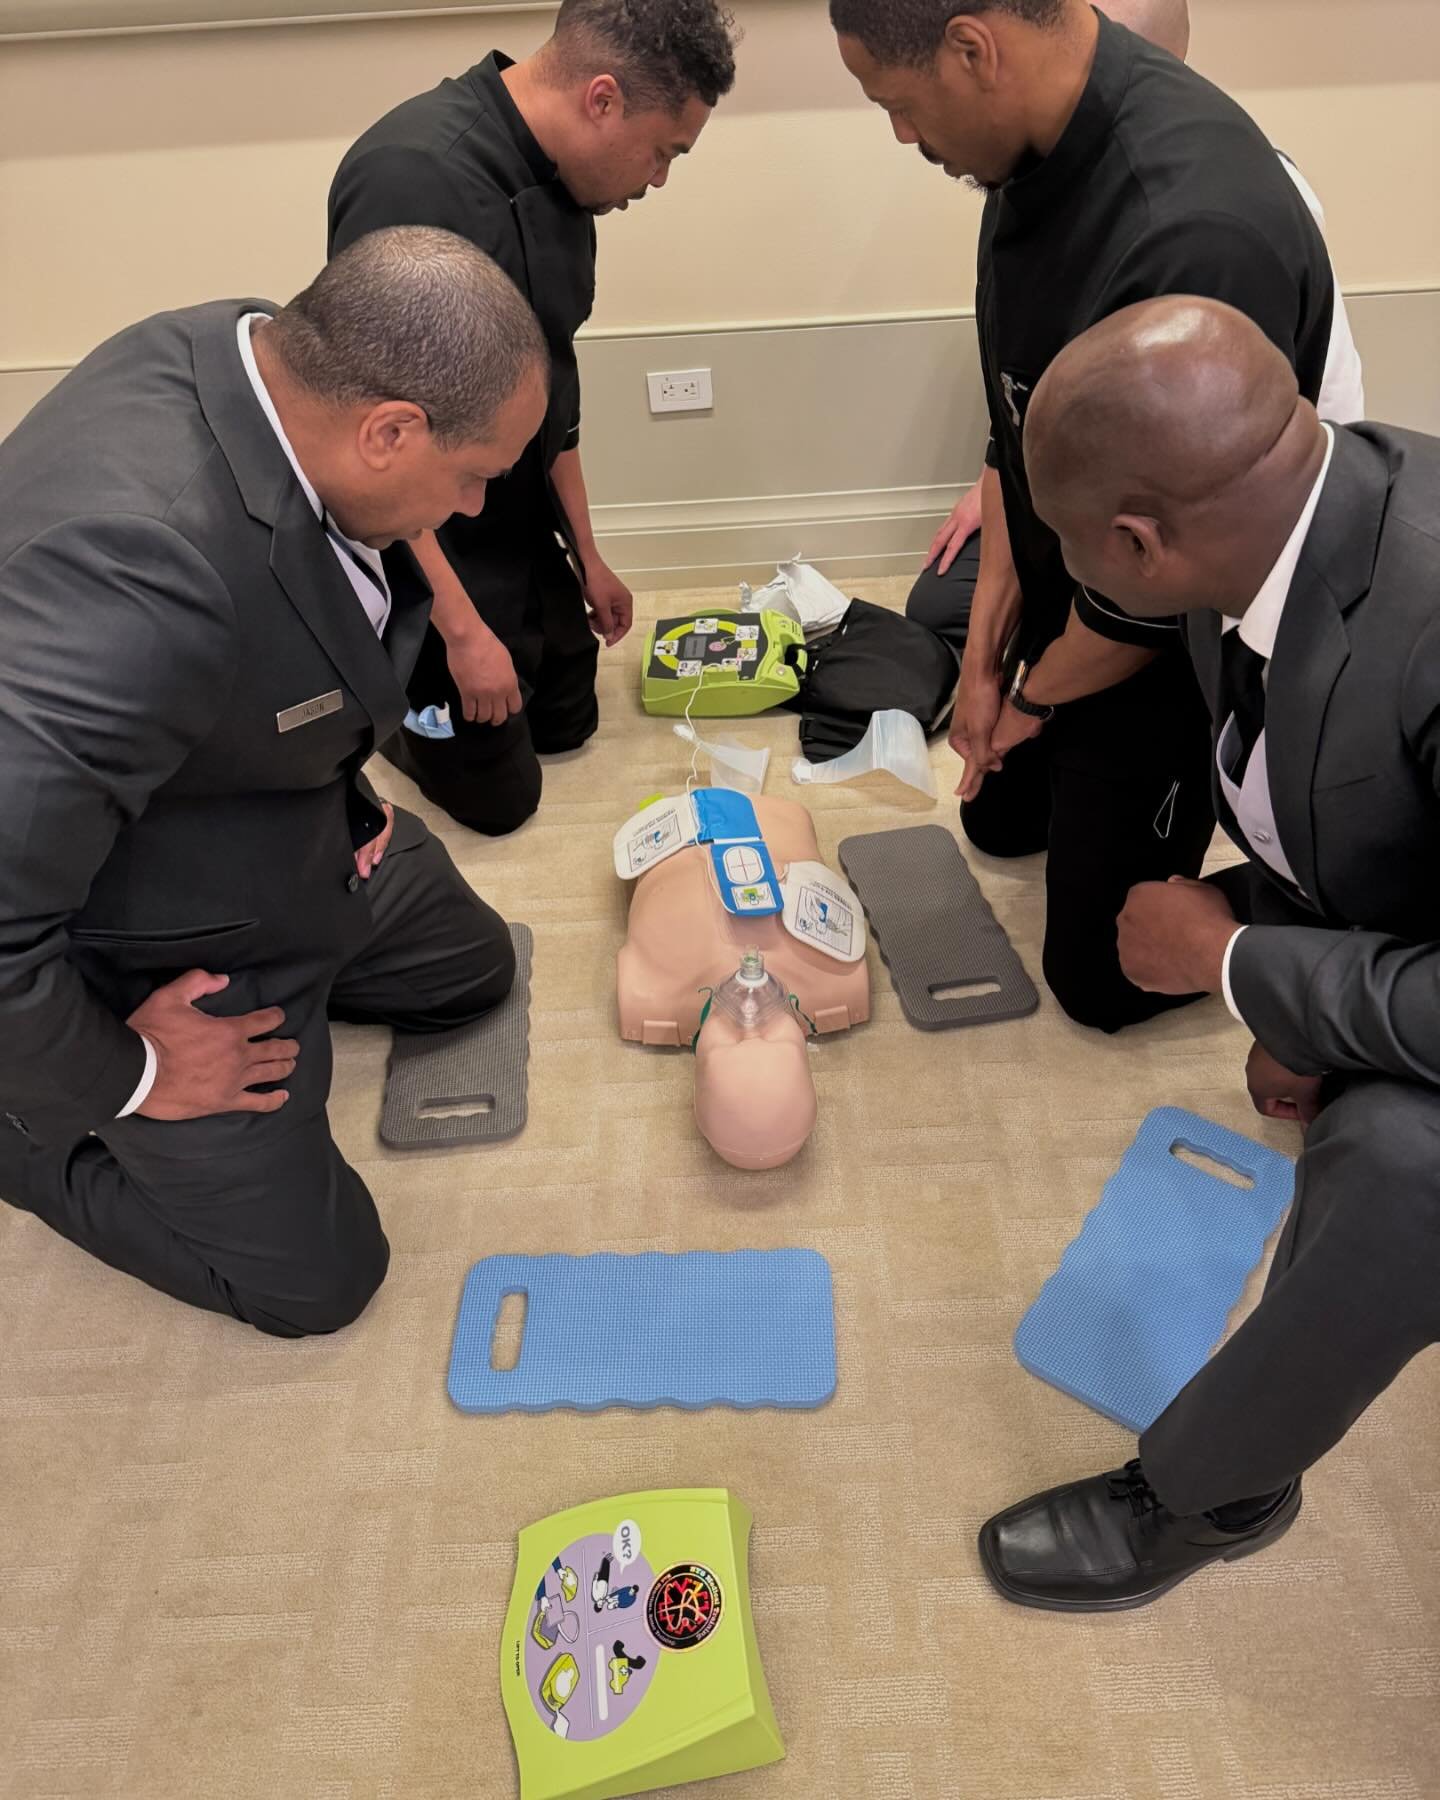 CPR/AED renewal with a great team from a New York City luxury residence facility.